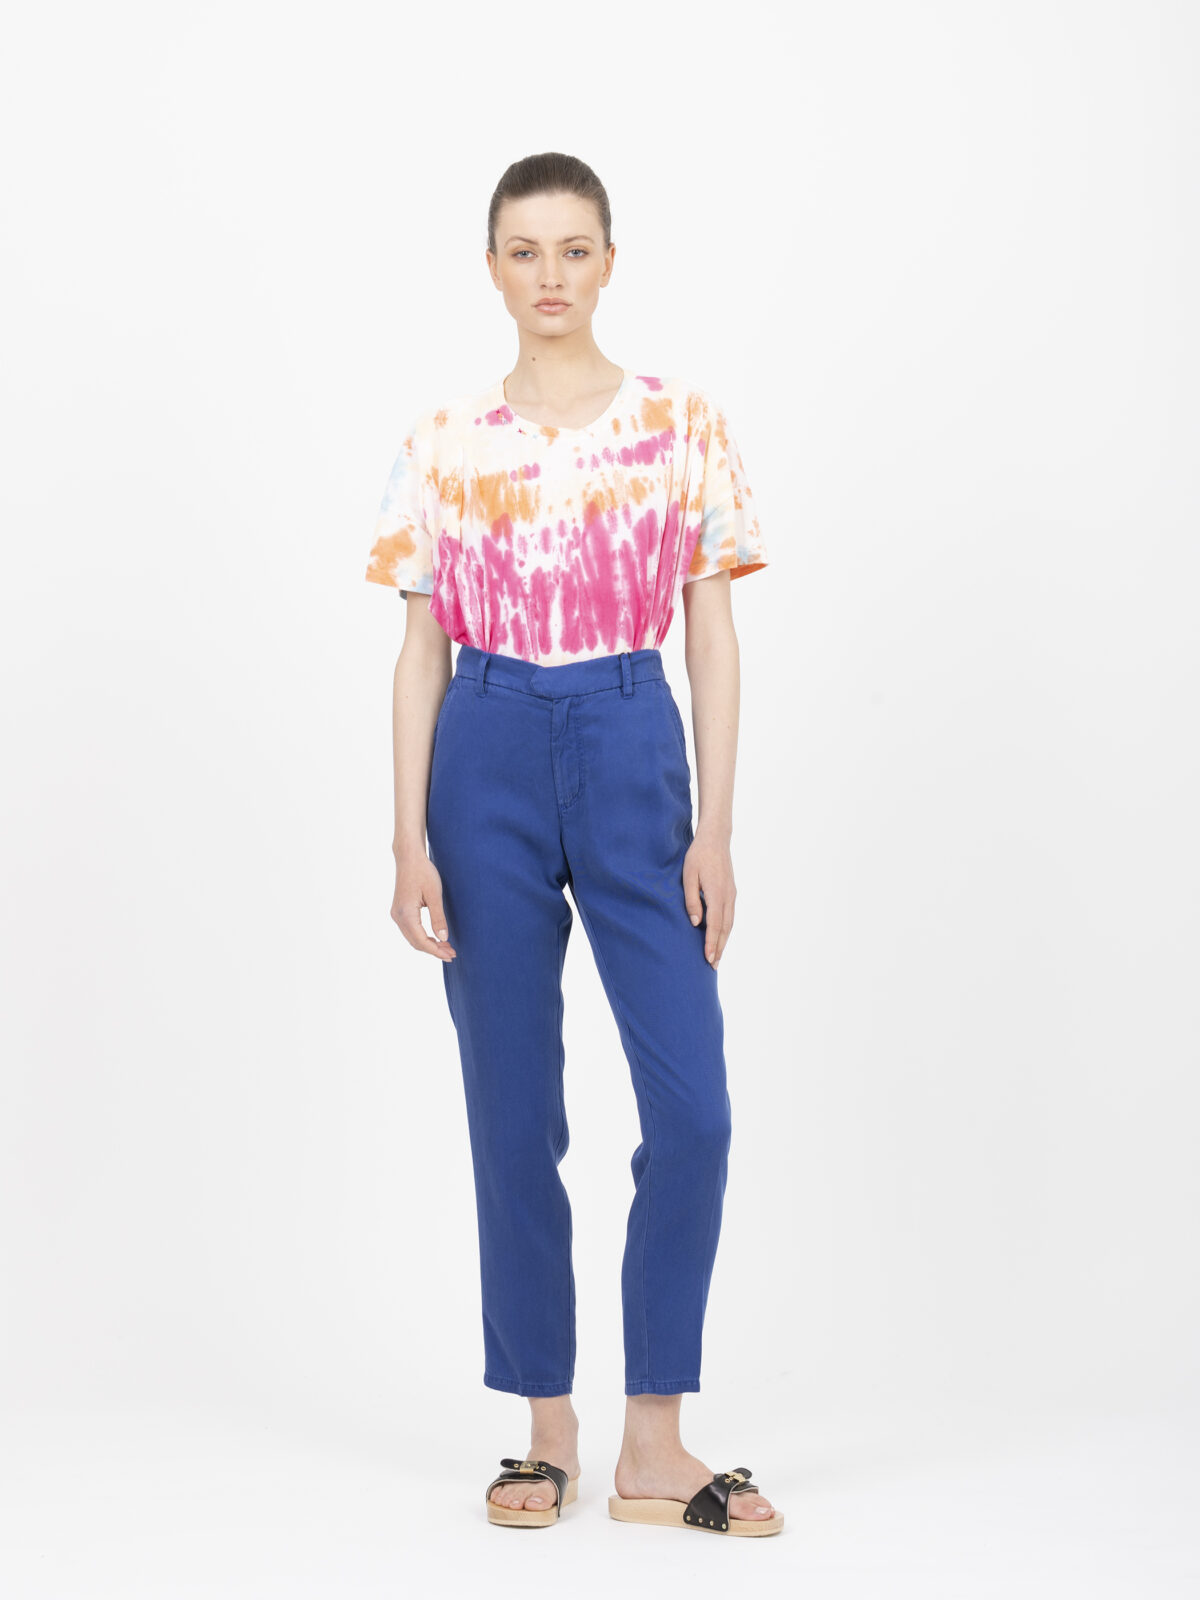 thea-blue-electric-trousers-carrot-fit-chino-tencel-labdip-matchboxathens